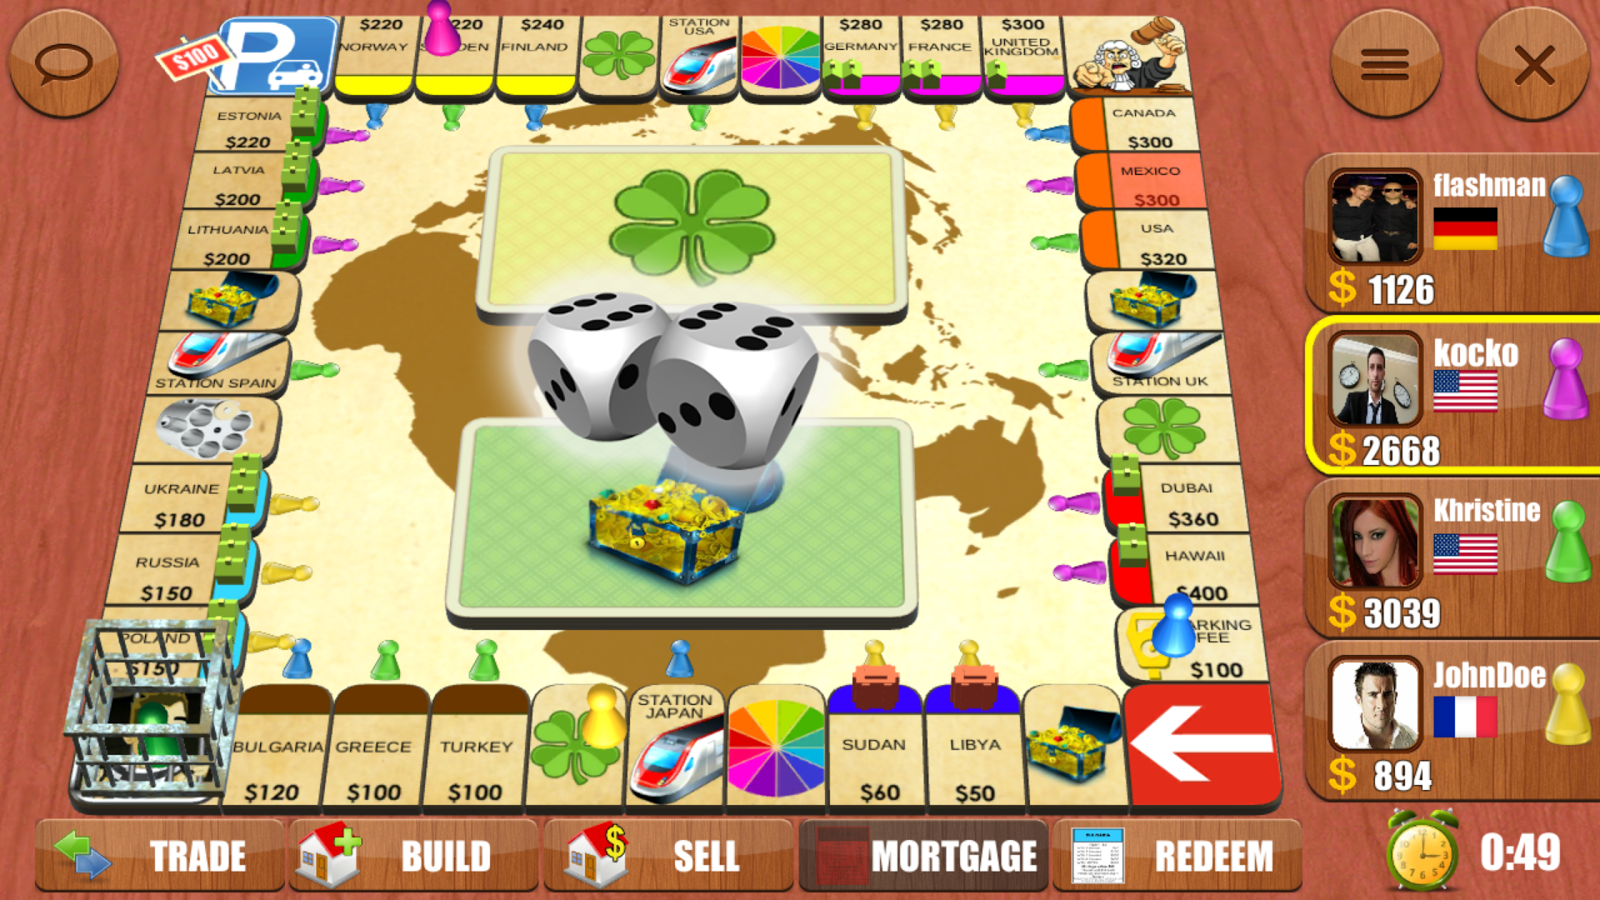 Rento   Dice Board Game Online  Screenshot - Board Game, Transparent background PNG HD thumbnail